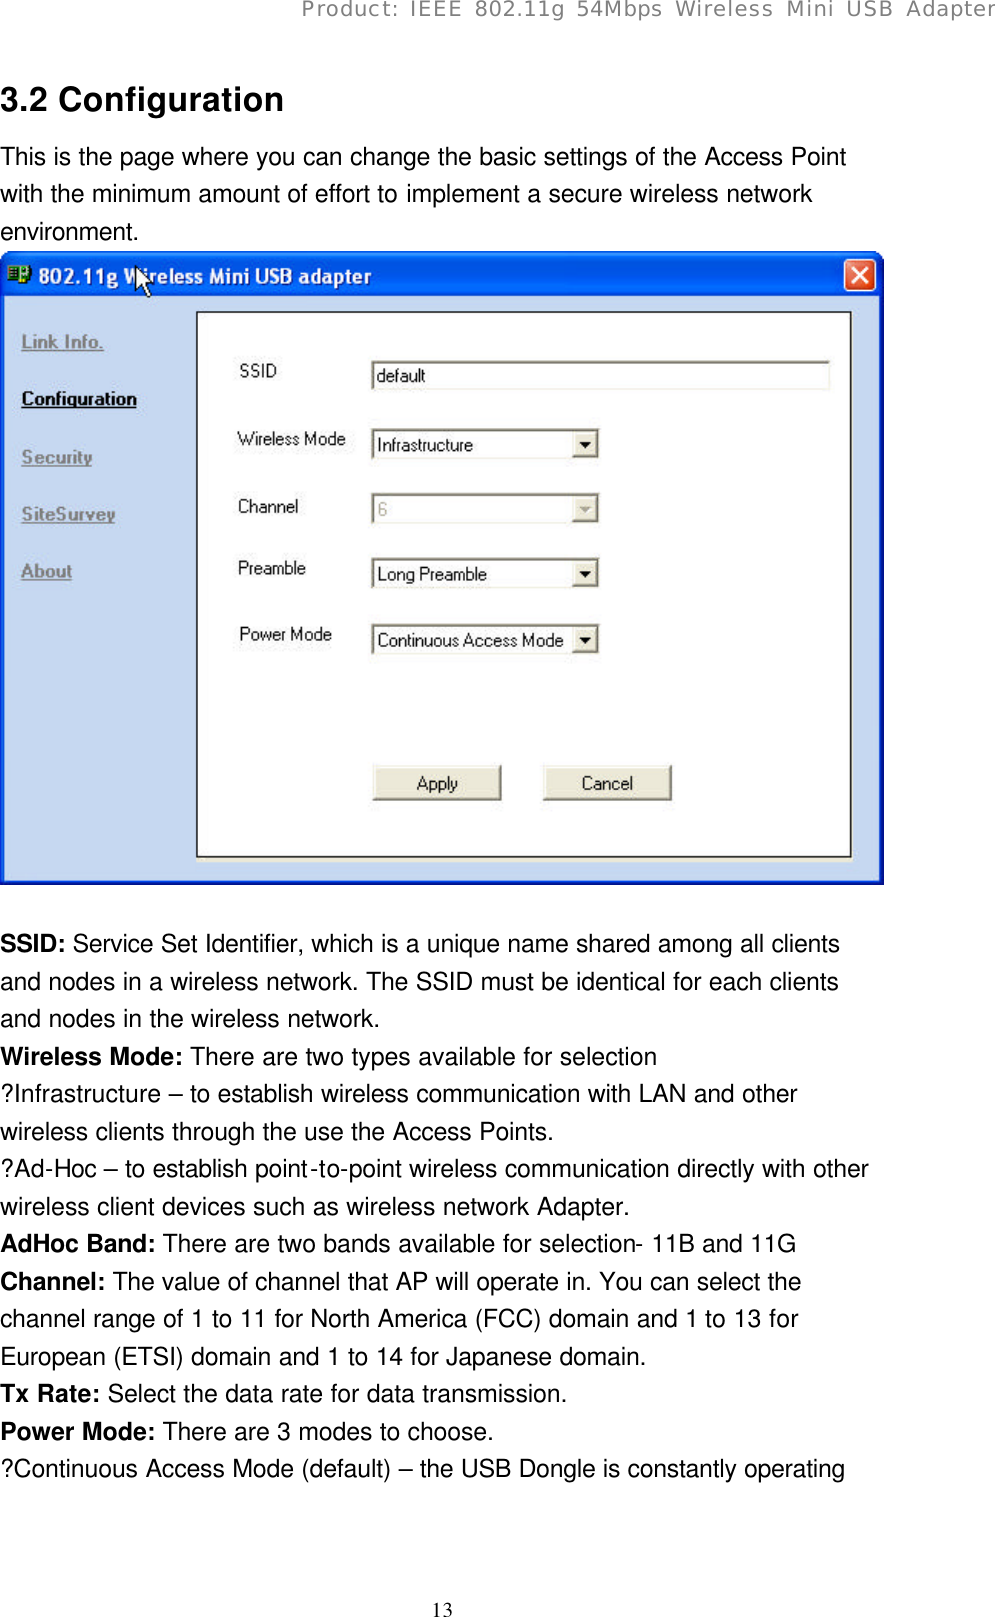      13Product: IEEE 802.11g 54Mbps Wireless Mini USB Adapter3.2 Configuration This is the page where you can change the basic settings of the Access Point with the minimum amount of effort to implement a secure wireless network environment.   SSID: Service Set Identifier, which is a unique name shared among all clients and nodes in a wireless network. The SSID must be identical for each clients and nodes in the wireless network. Wireless Mode: There are two types available for selection ?Infrastructure – to establish wireless communication with LAN and other wireless clients through the use the Access Points. ?Ad-Hoc – to establish point-to-point wireless communication directly with other wireless client devices such as wireless network Adapter. AdHoc Band: There are two bands available for selection- 11B and 11G Channel: The value of channel that AP will operate in. You can select the channel range of 1 to 11 for North America (FCC) domain and 1 to 13 for European (ETSI) domain and 1 to 14 for Japanese domain. Tx Rate: Select the data rate for data transmission. Power Mode: There are 3 modes to choose. ?Continuous Access Mode (default) – the USB Dongle is constantly operating 